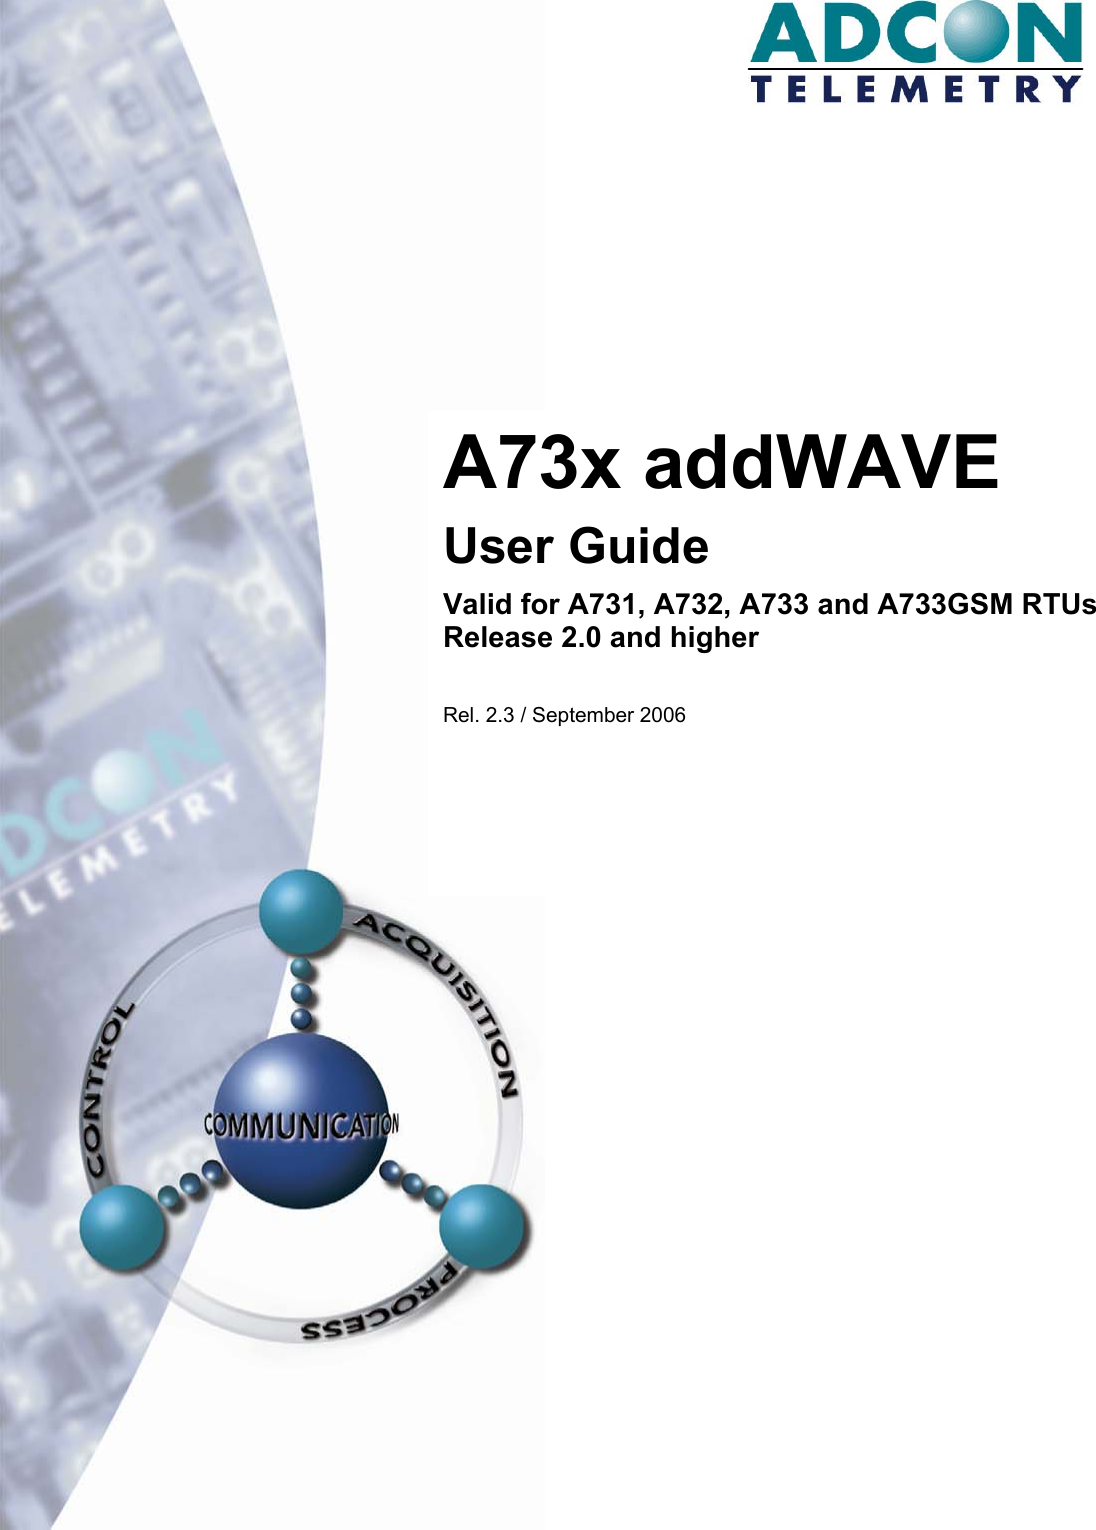        A73x addWAVE User Guide Valid for A731, A732, A733 and A733GSM RTUs  Release 2.0 and higher  Rel. 2.3 / September 2006  